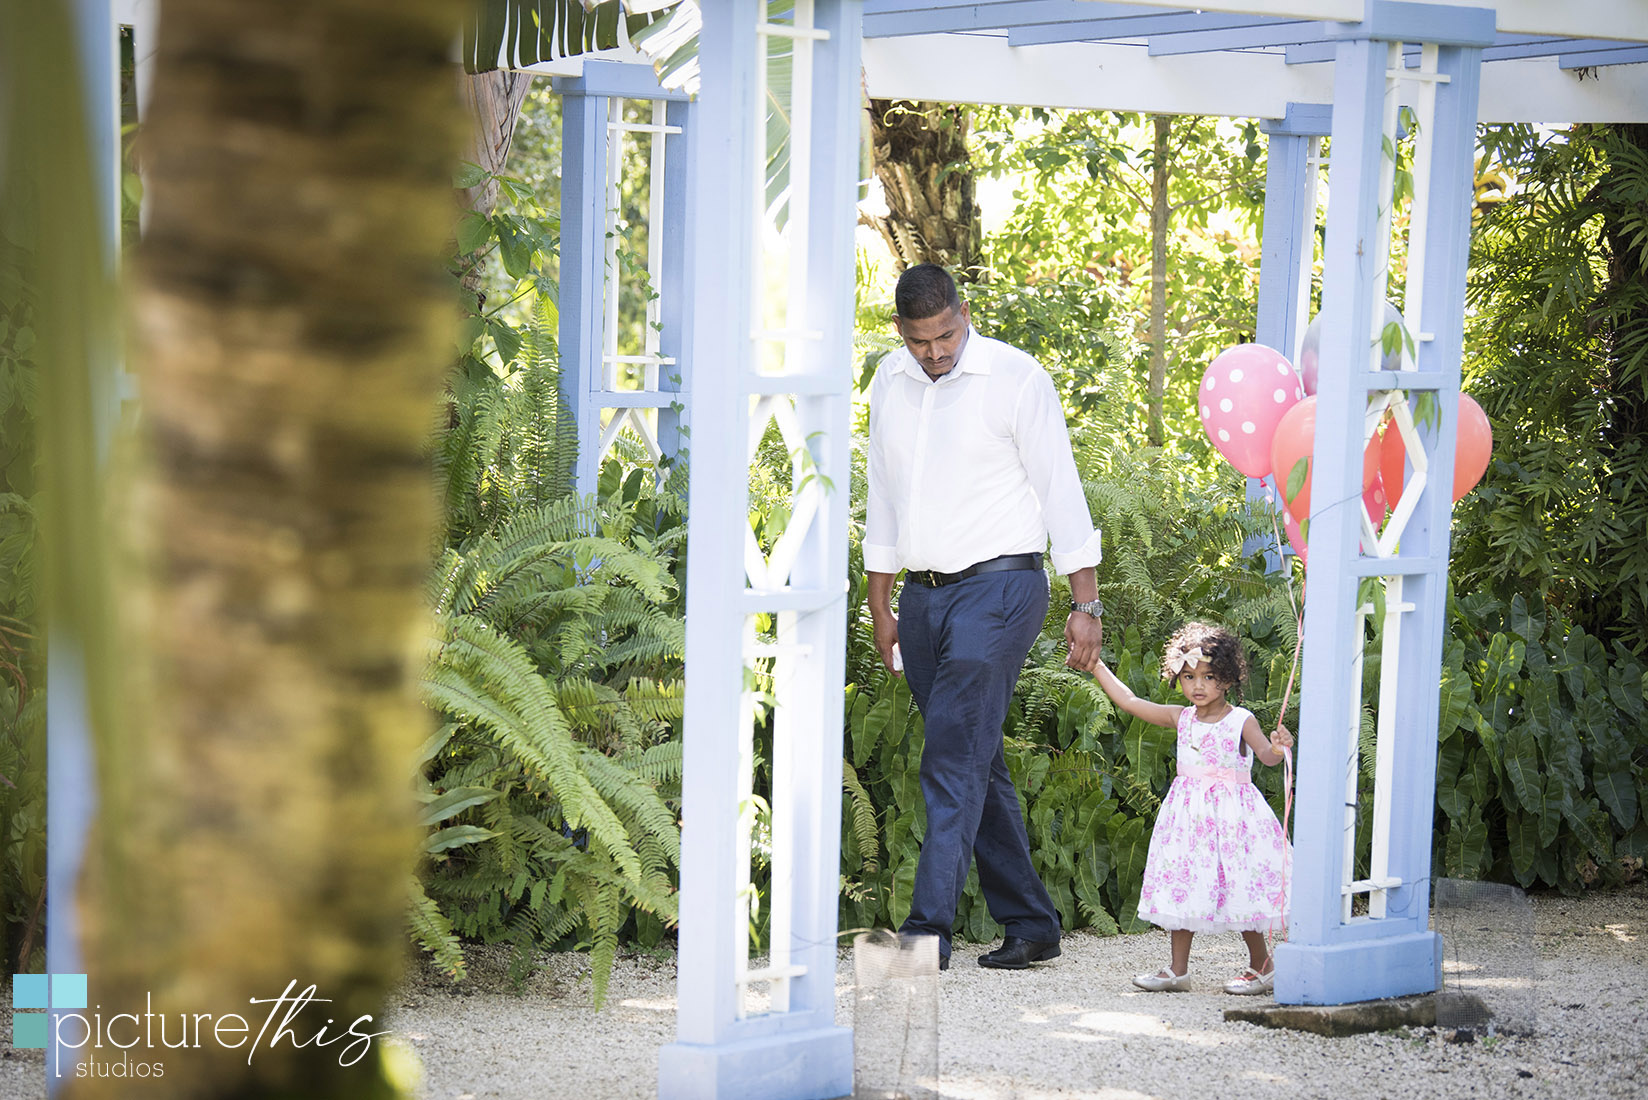 This beautiful little two year old celebrated with family portraits at The Cayman Islands Botanical Park by Heather Holt Photography with Picture This Studios